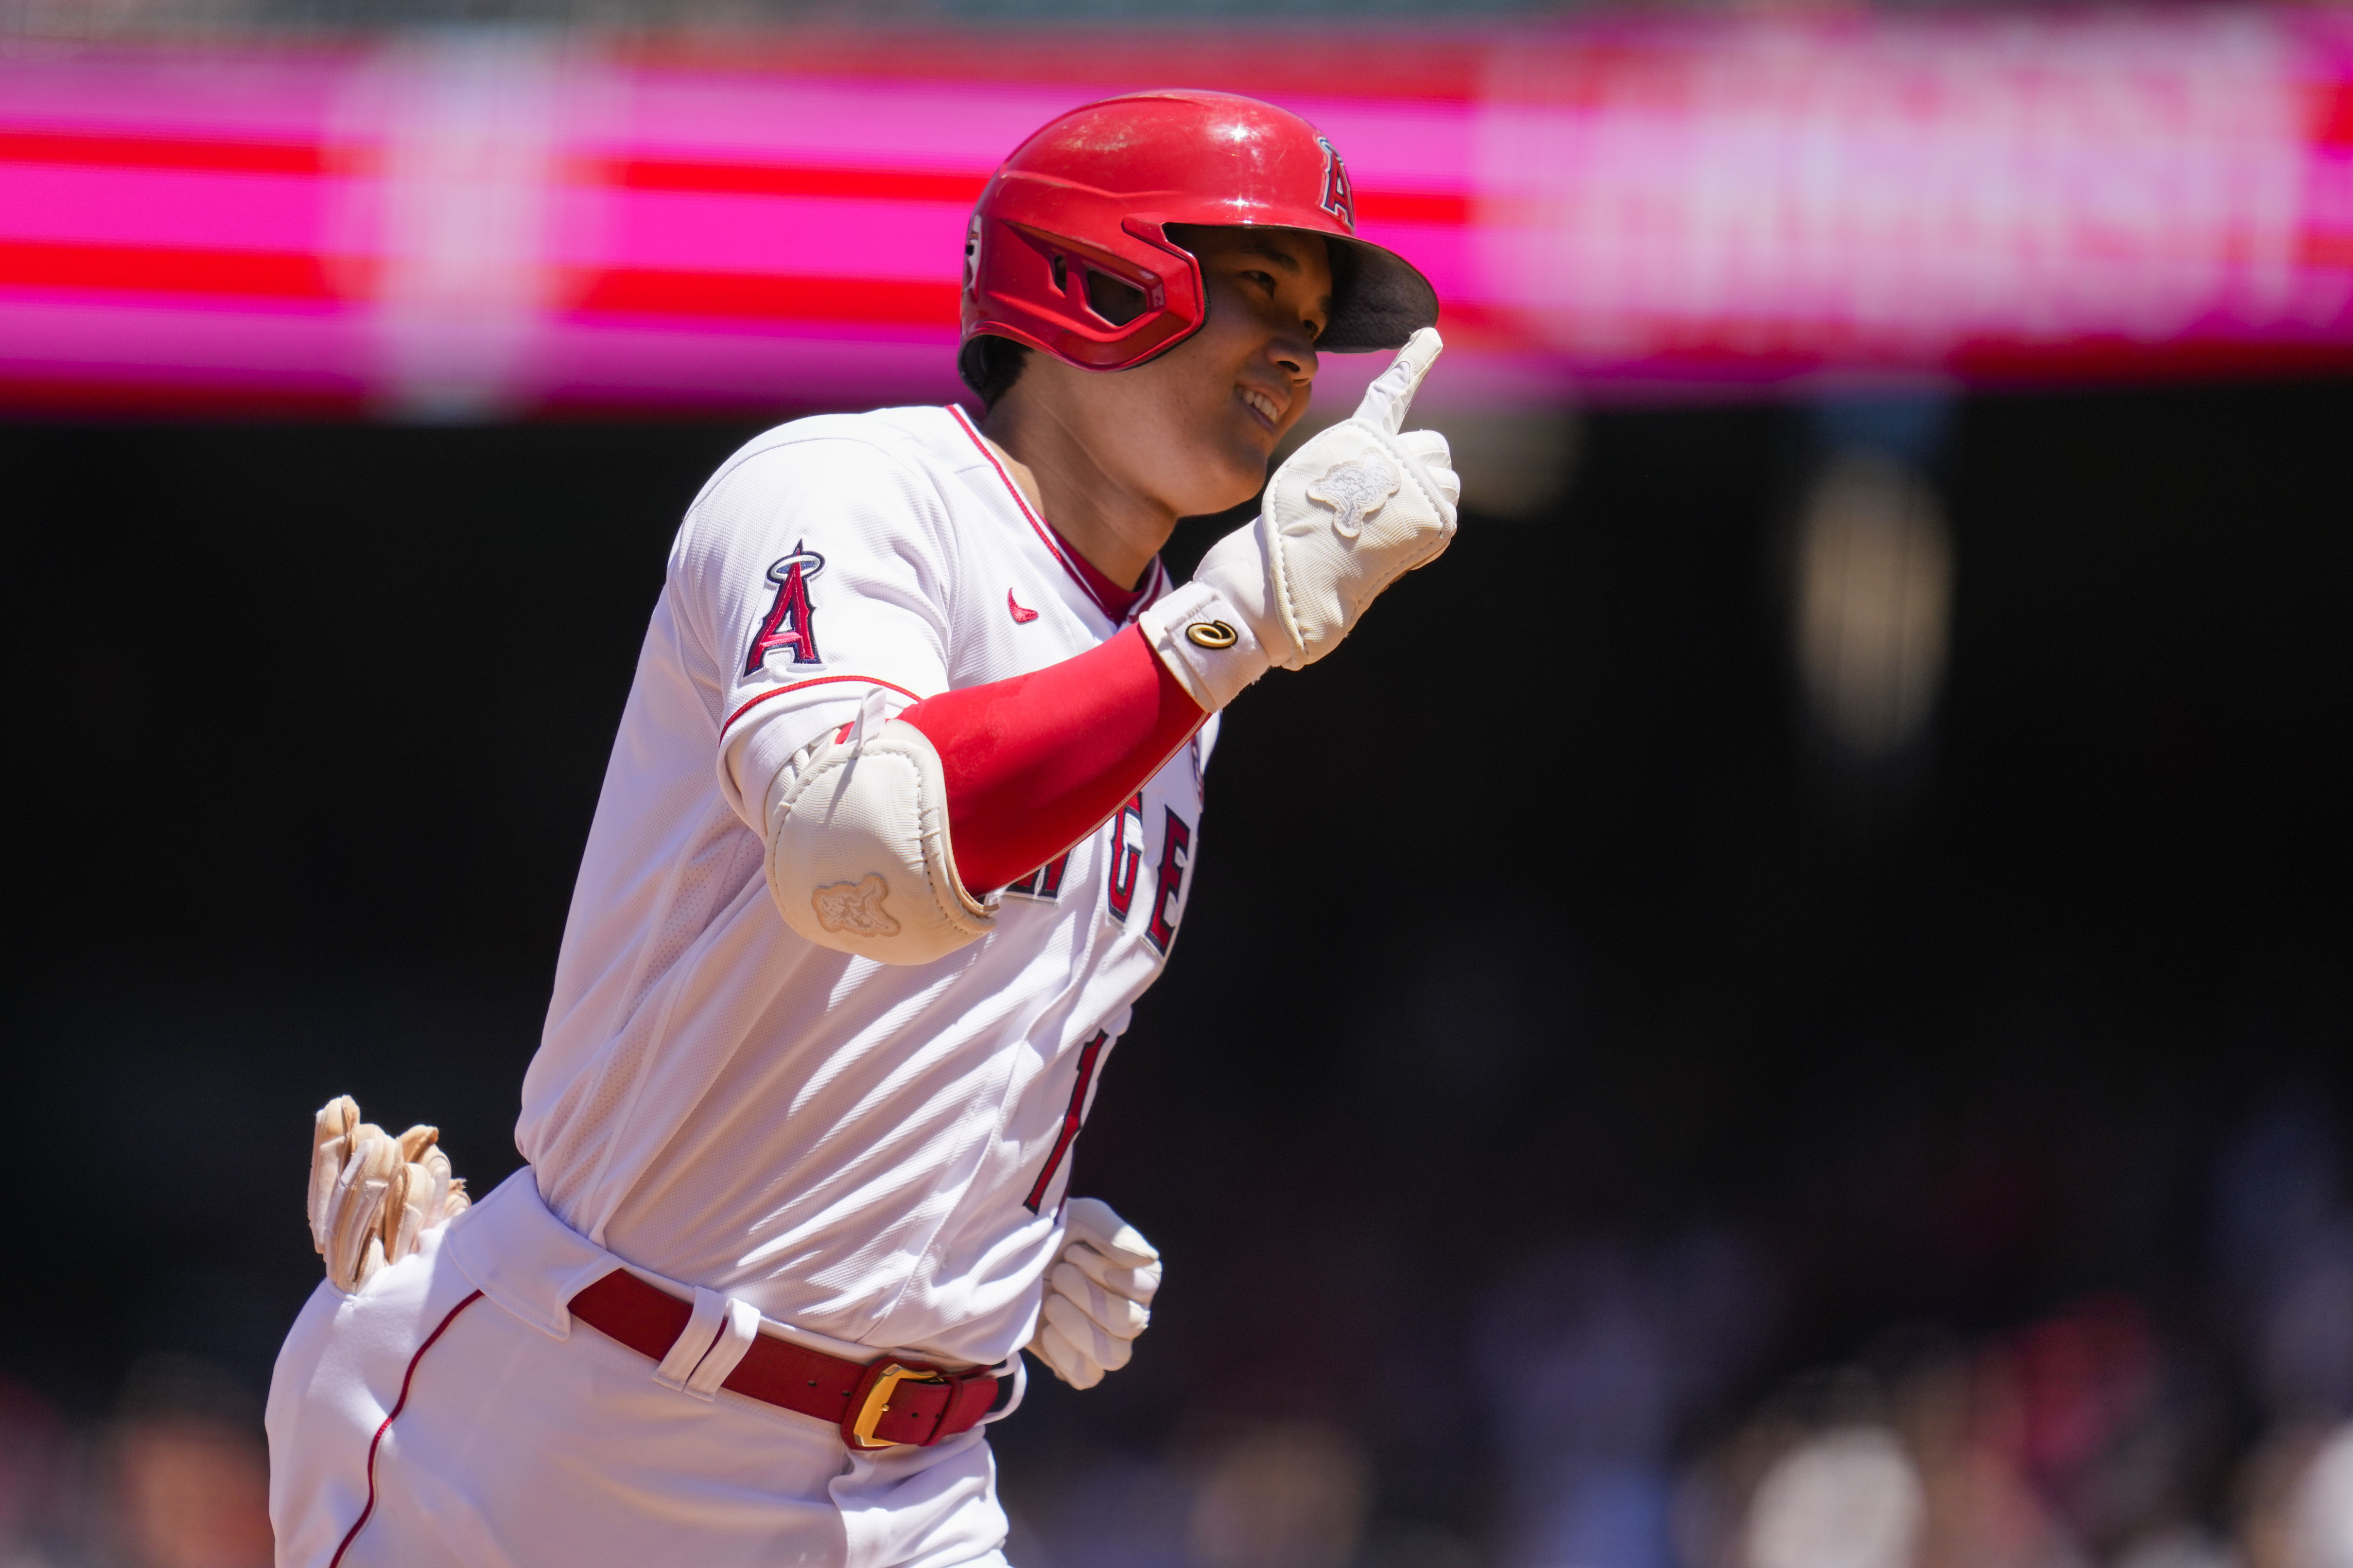 Shohei Ohtani to start at DH in All-Star Game as leading AL vote-getter